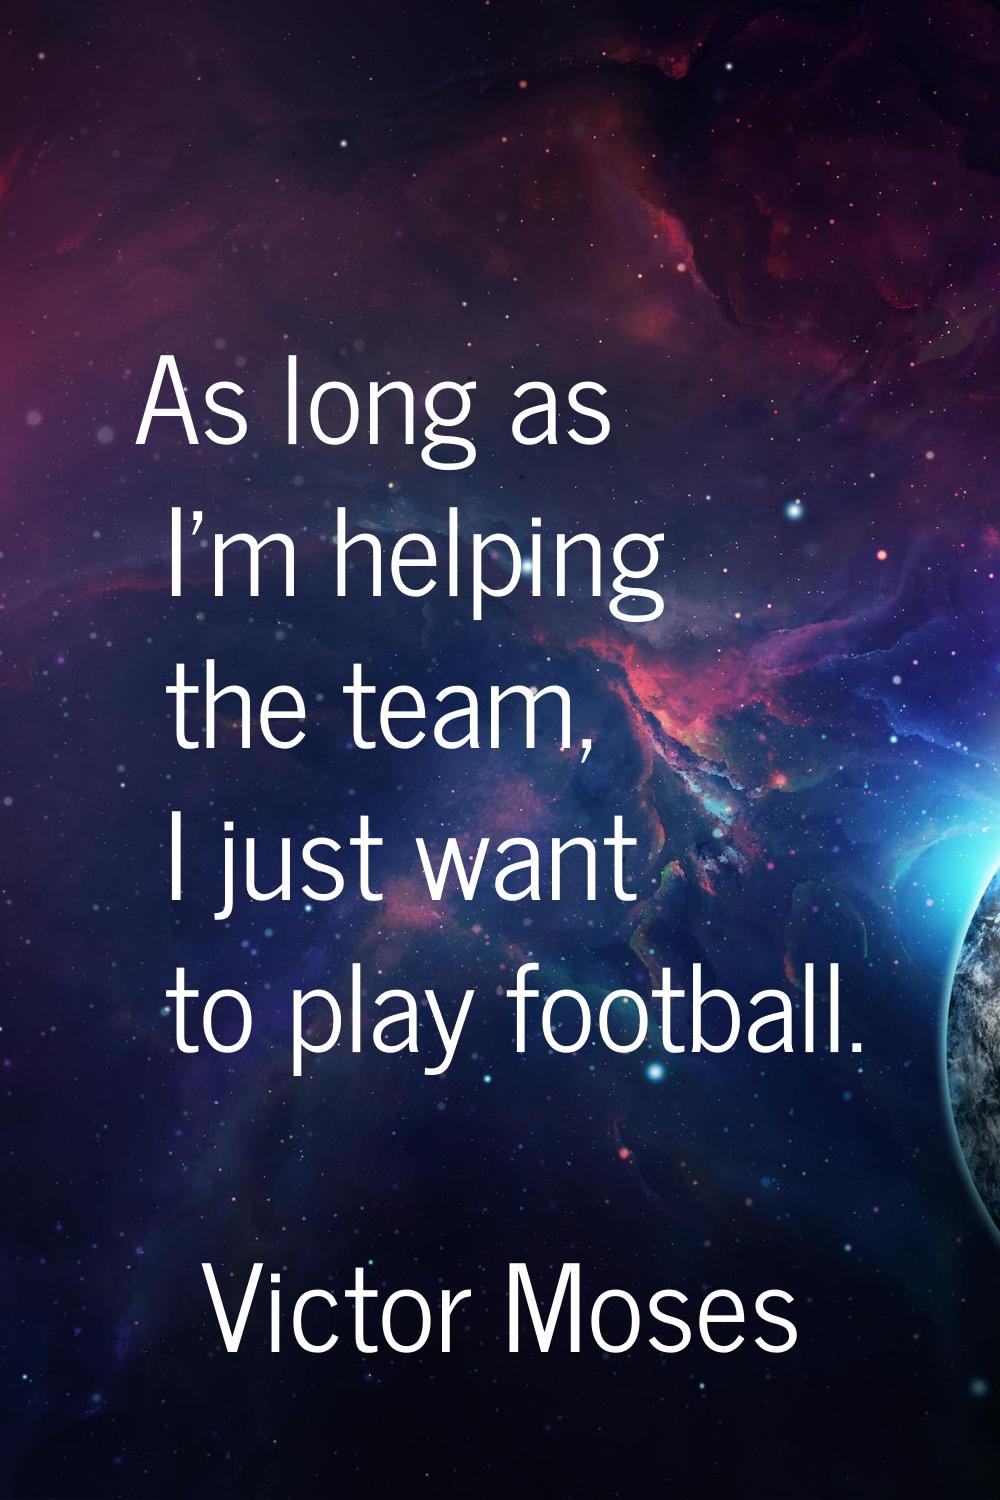 As long as I'm helping the team, I just want to play football.